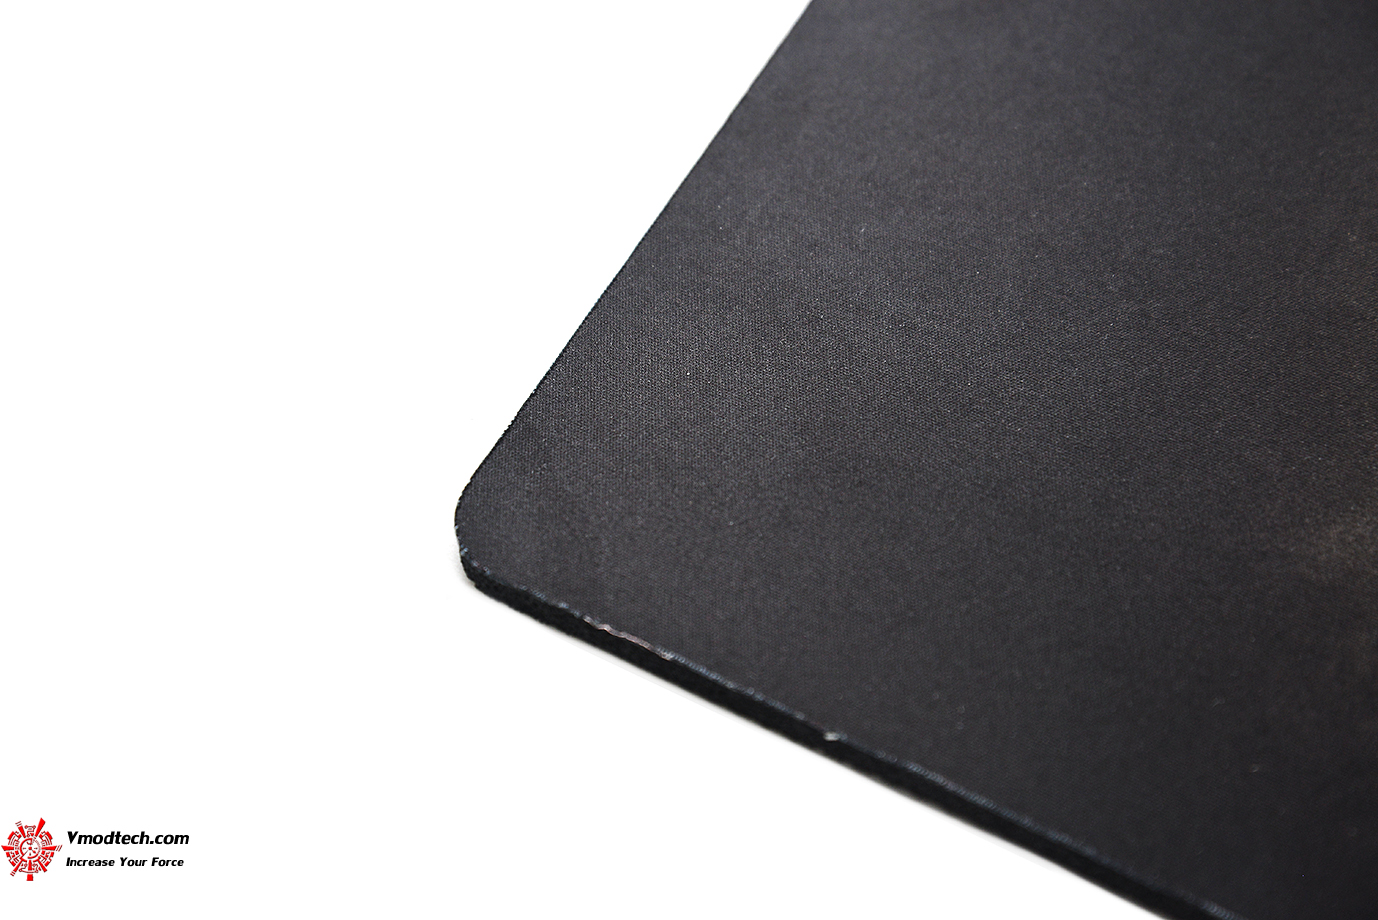 dsc 5057 MSI AGILITY GD20 GAMING MOUSEPAD REVIEW